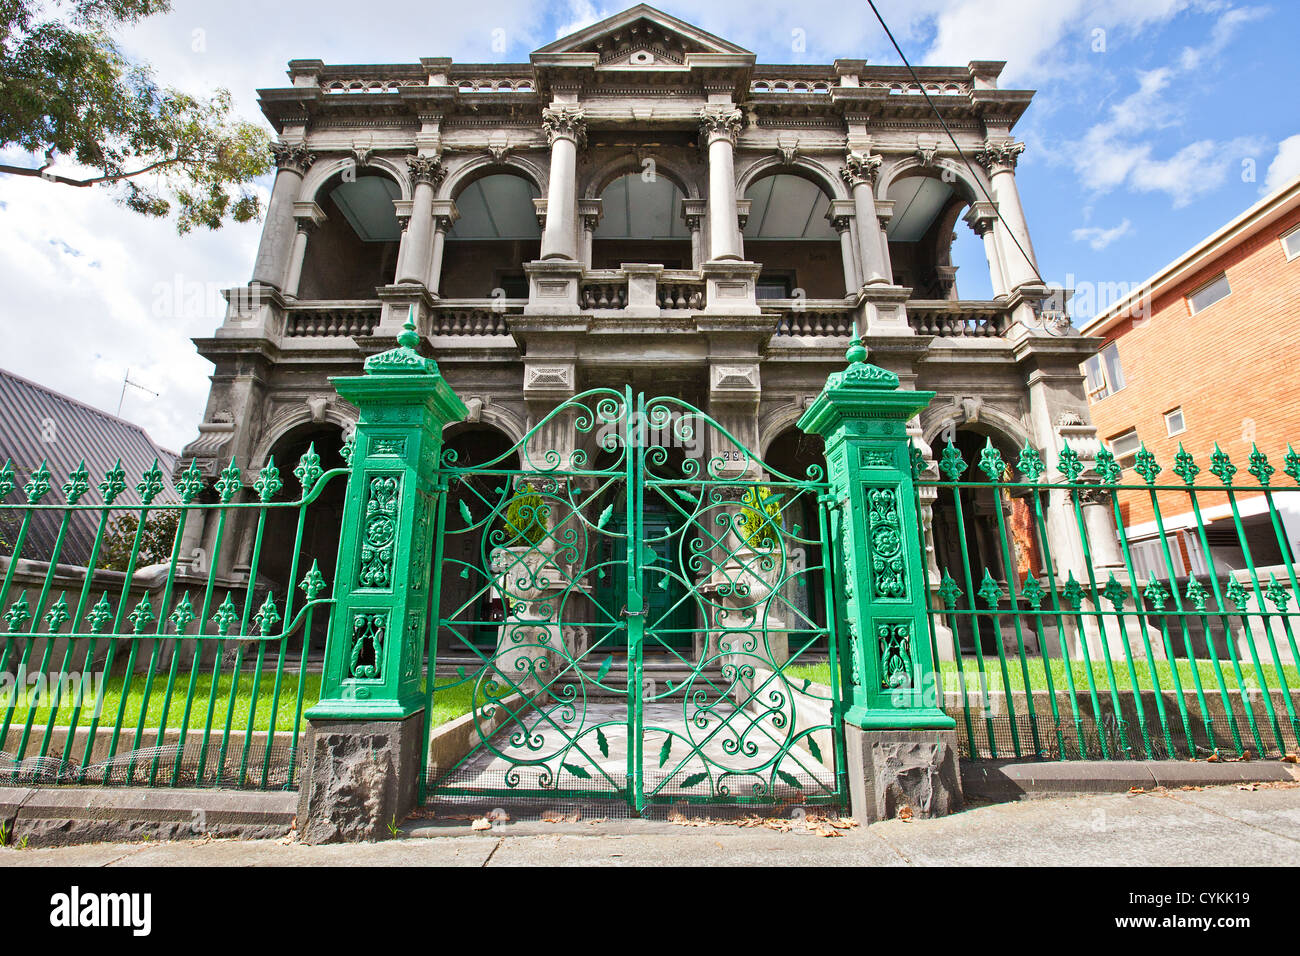 historical mansion stately home in Richmond Melbourne Australia Stock Photo